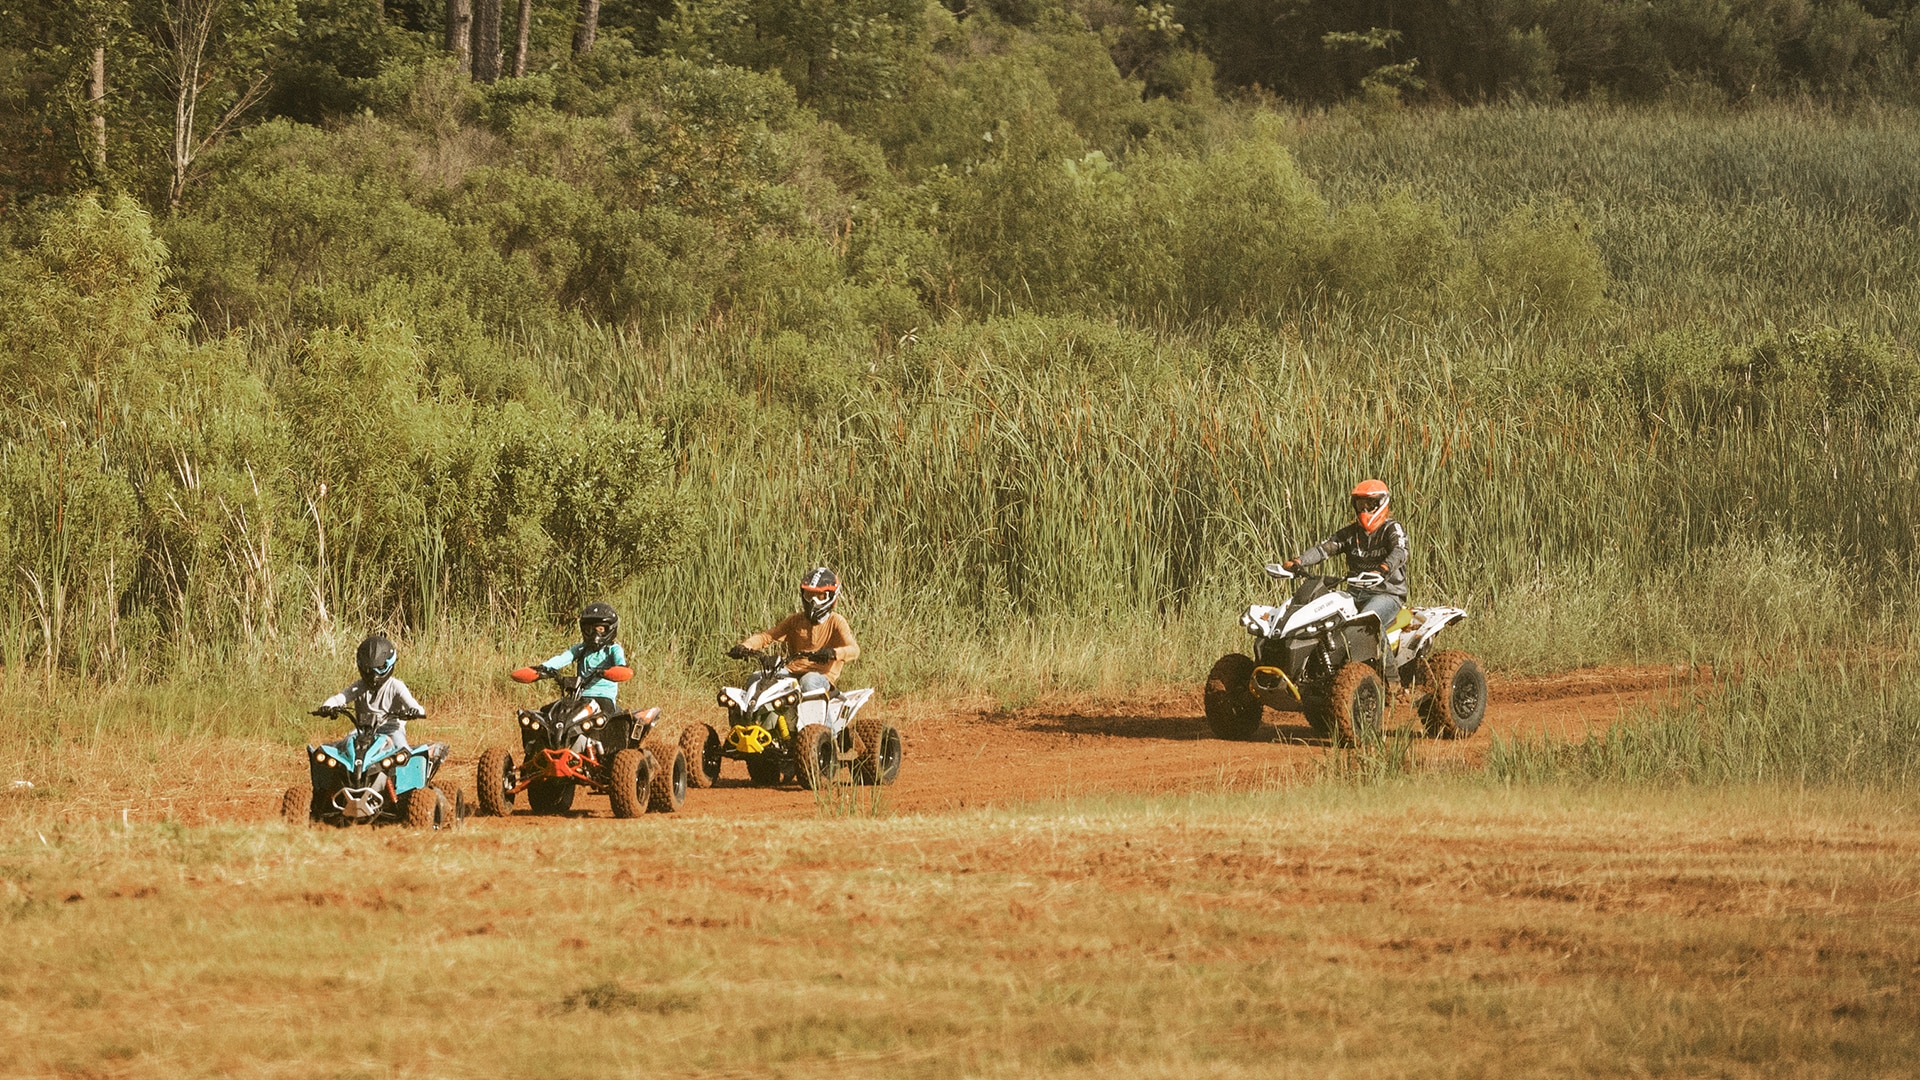 Can-Am riders driving in a line